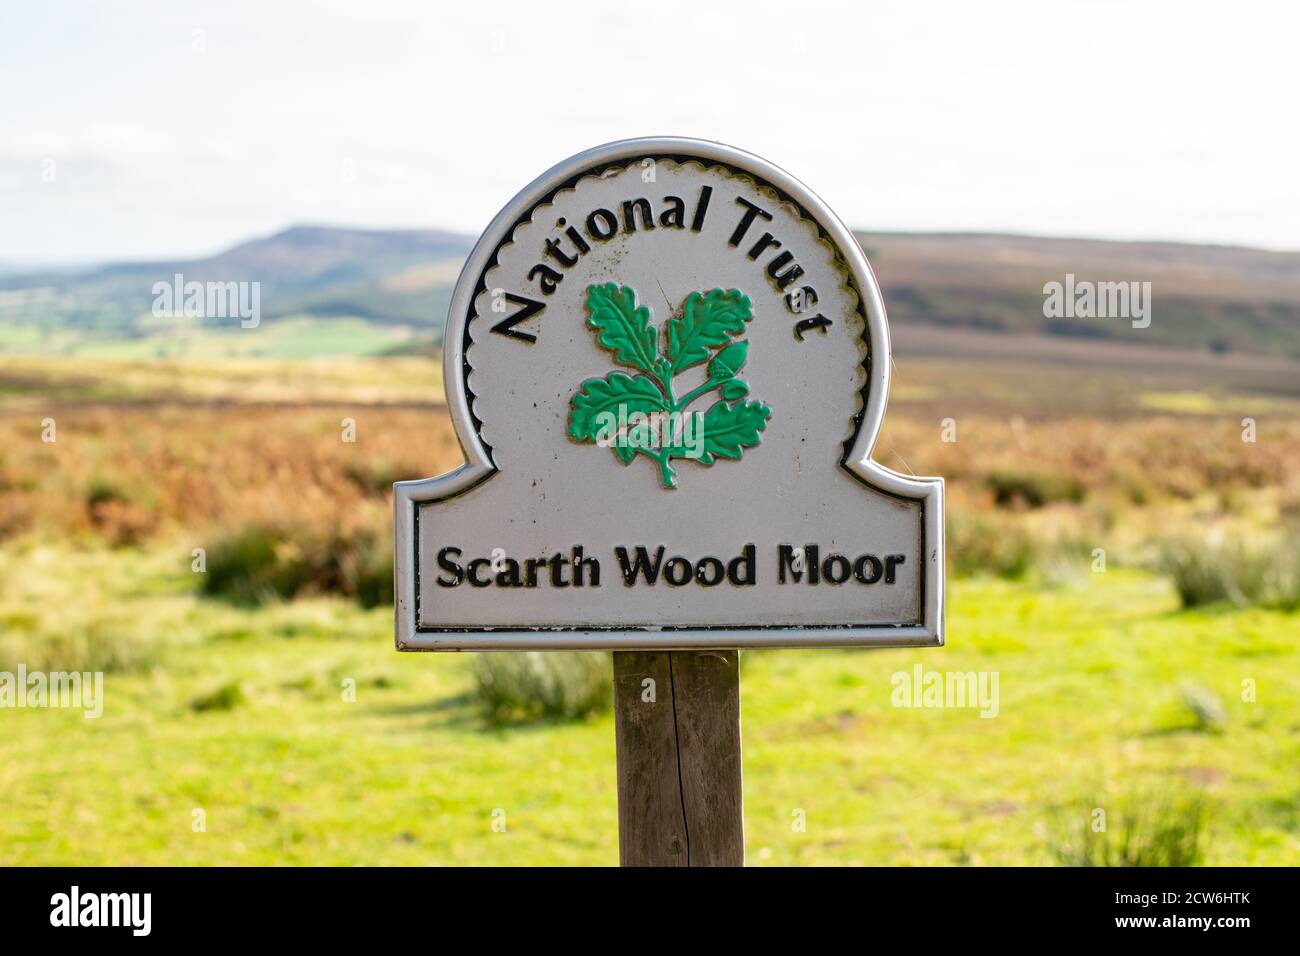 Scarth Wood Moor National Trust Sign, vicino a Osmotherley, Hambleton, North Yorkshire, Inghilterra, Regno Unito Foto Stock